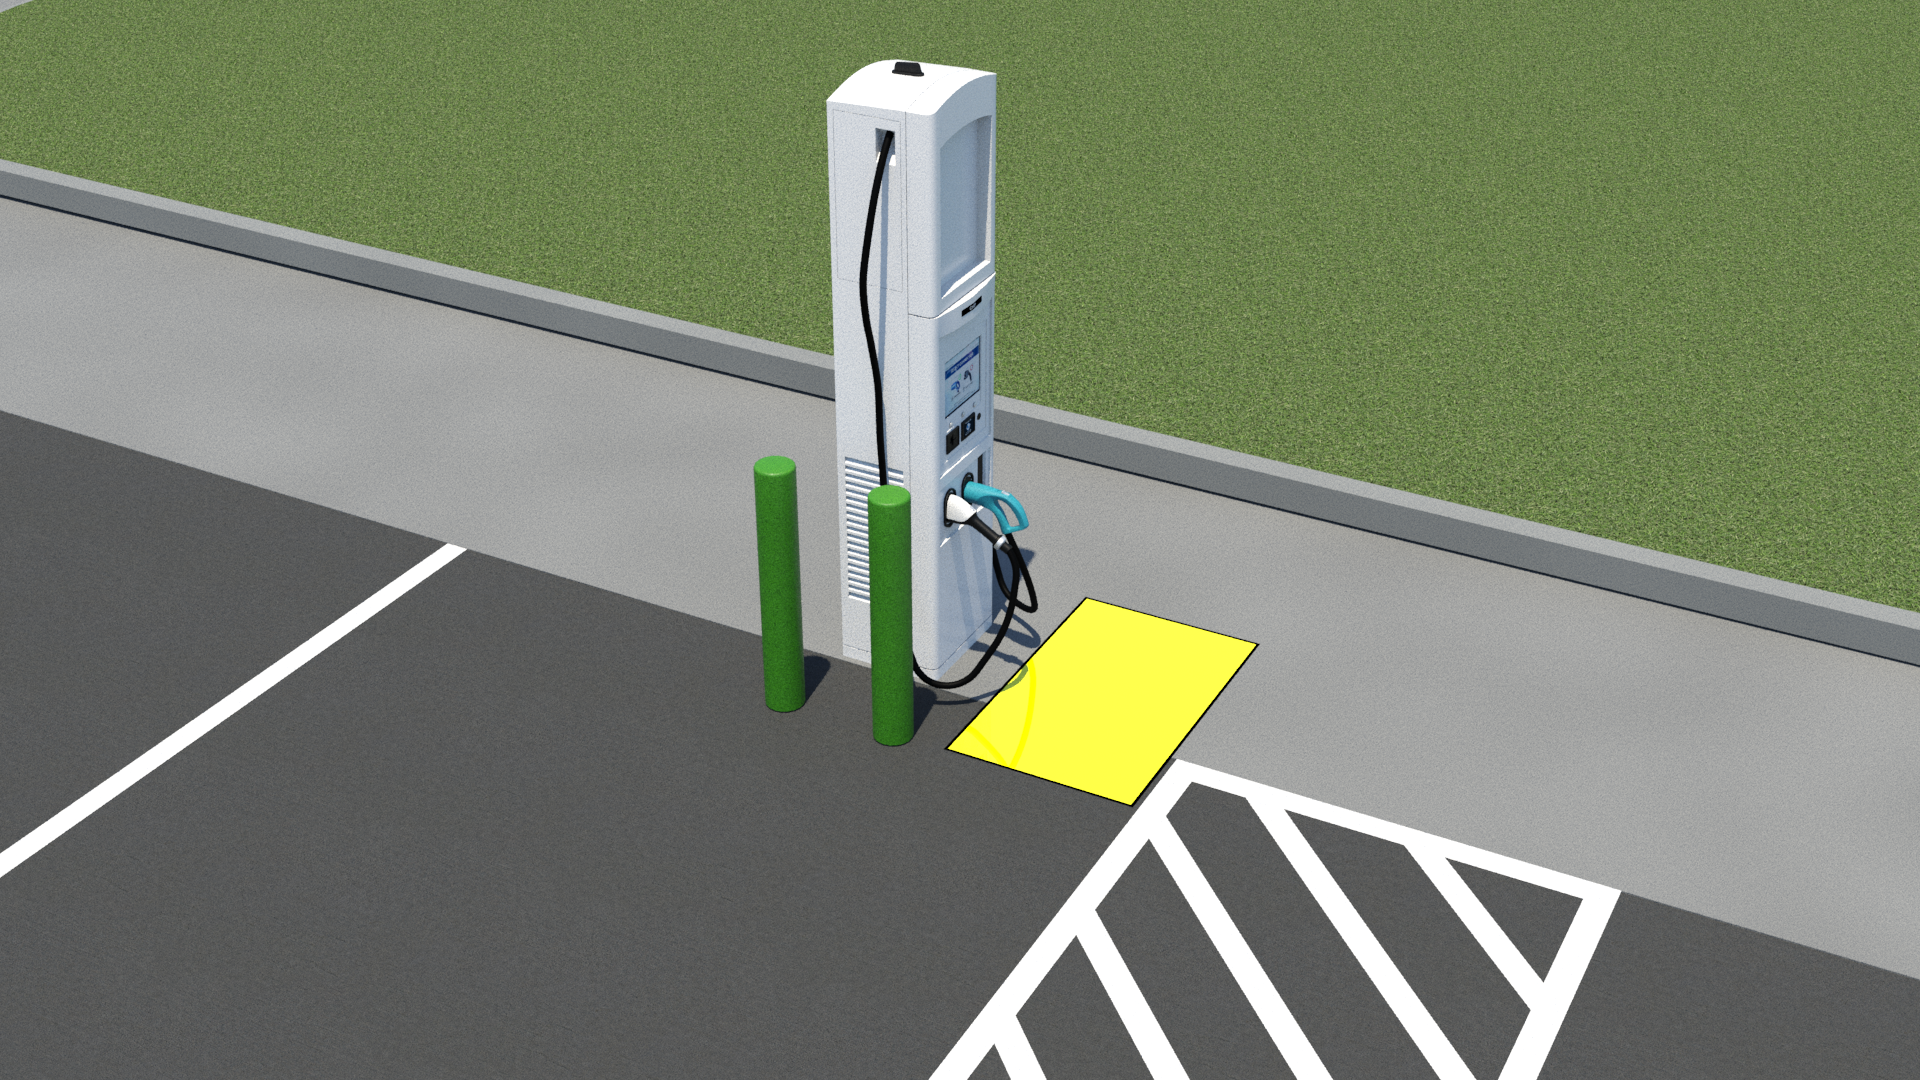 Two green bollards protect side of EV charger which has been rotated so front of EV charger faces access aisle on the right side of the charging space. Yellow rectangle in front of EV charger controls indicates clear floor space. EV charger is placed at center of the vehicle charging space on a flush sidewalk